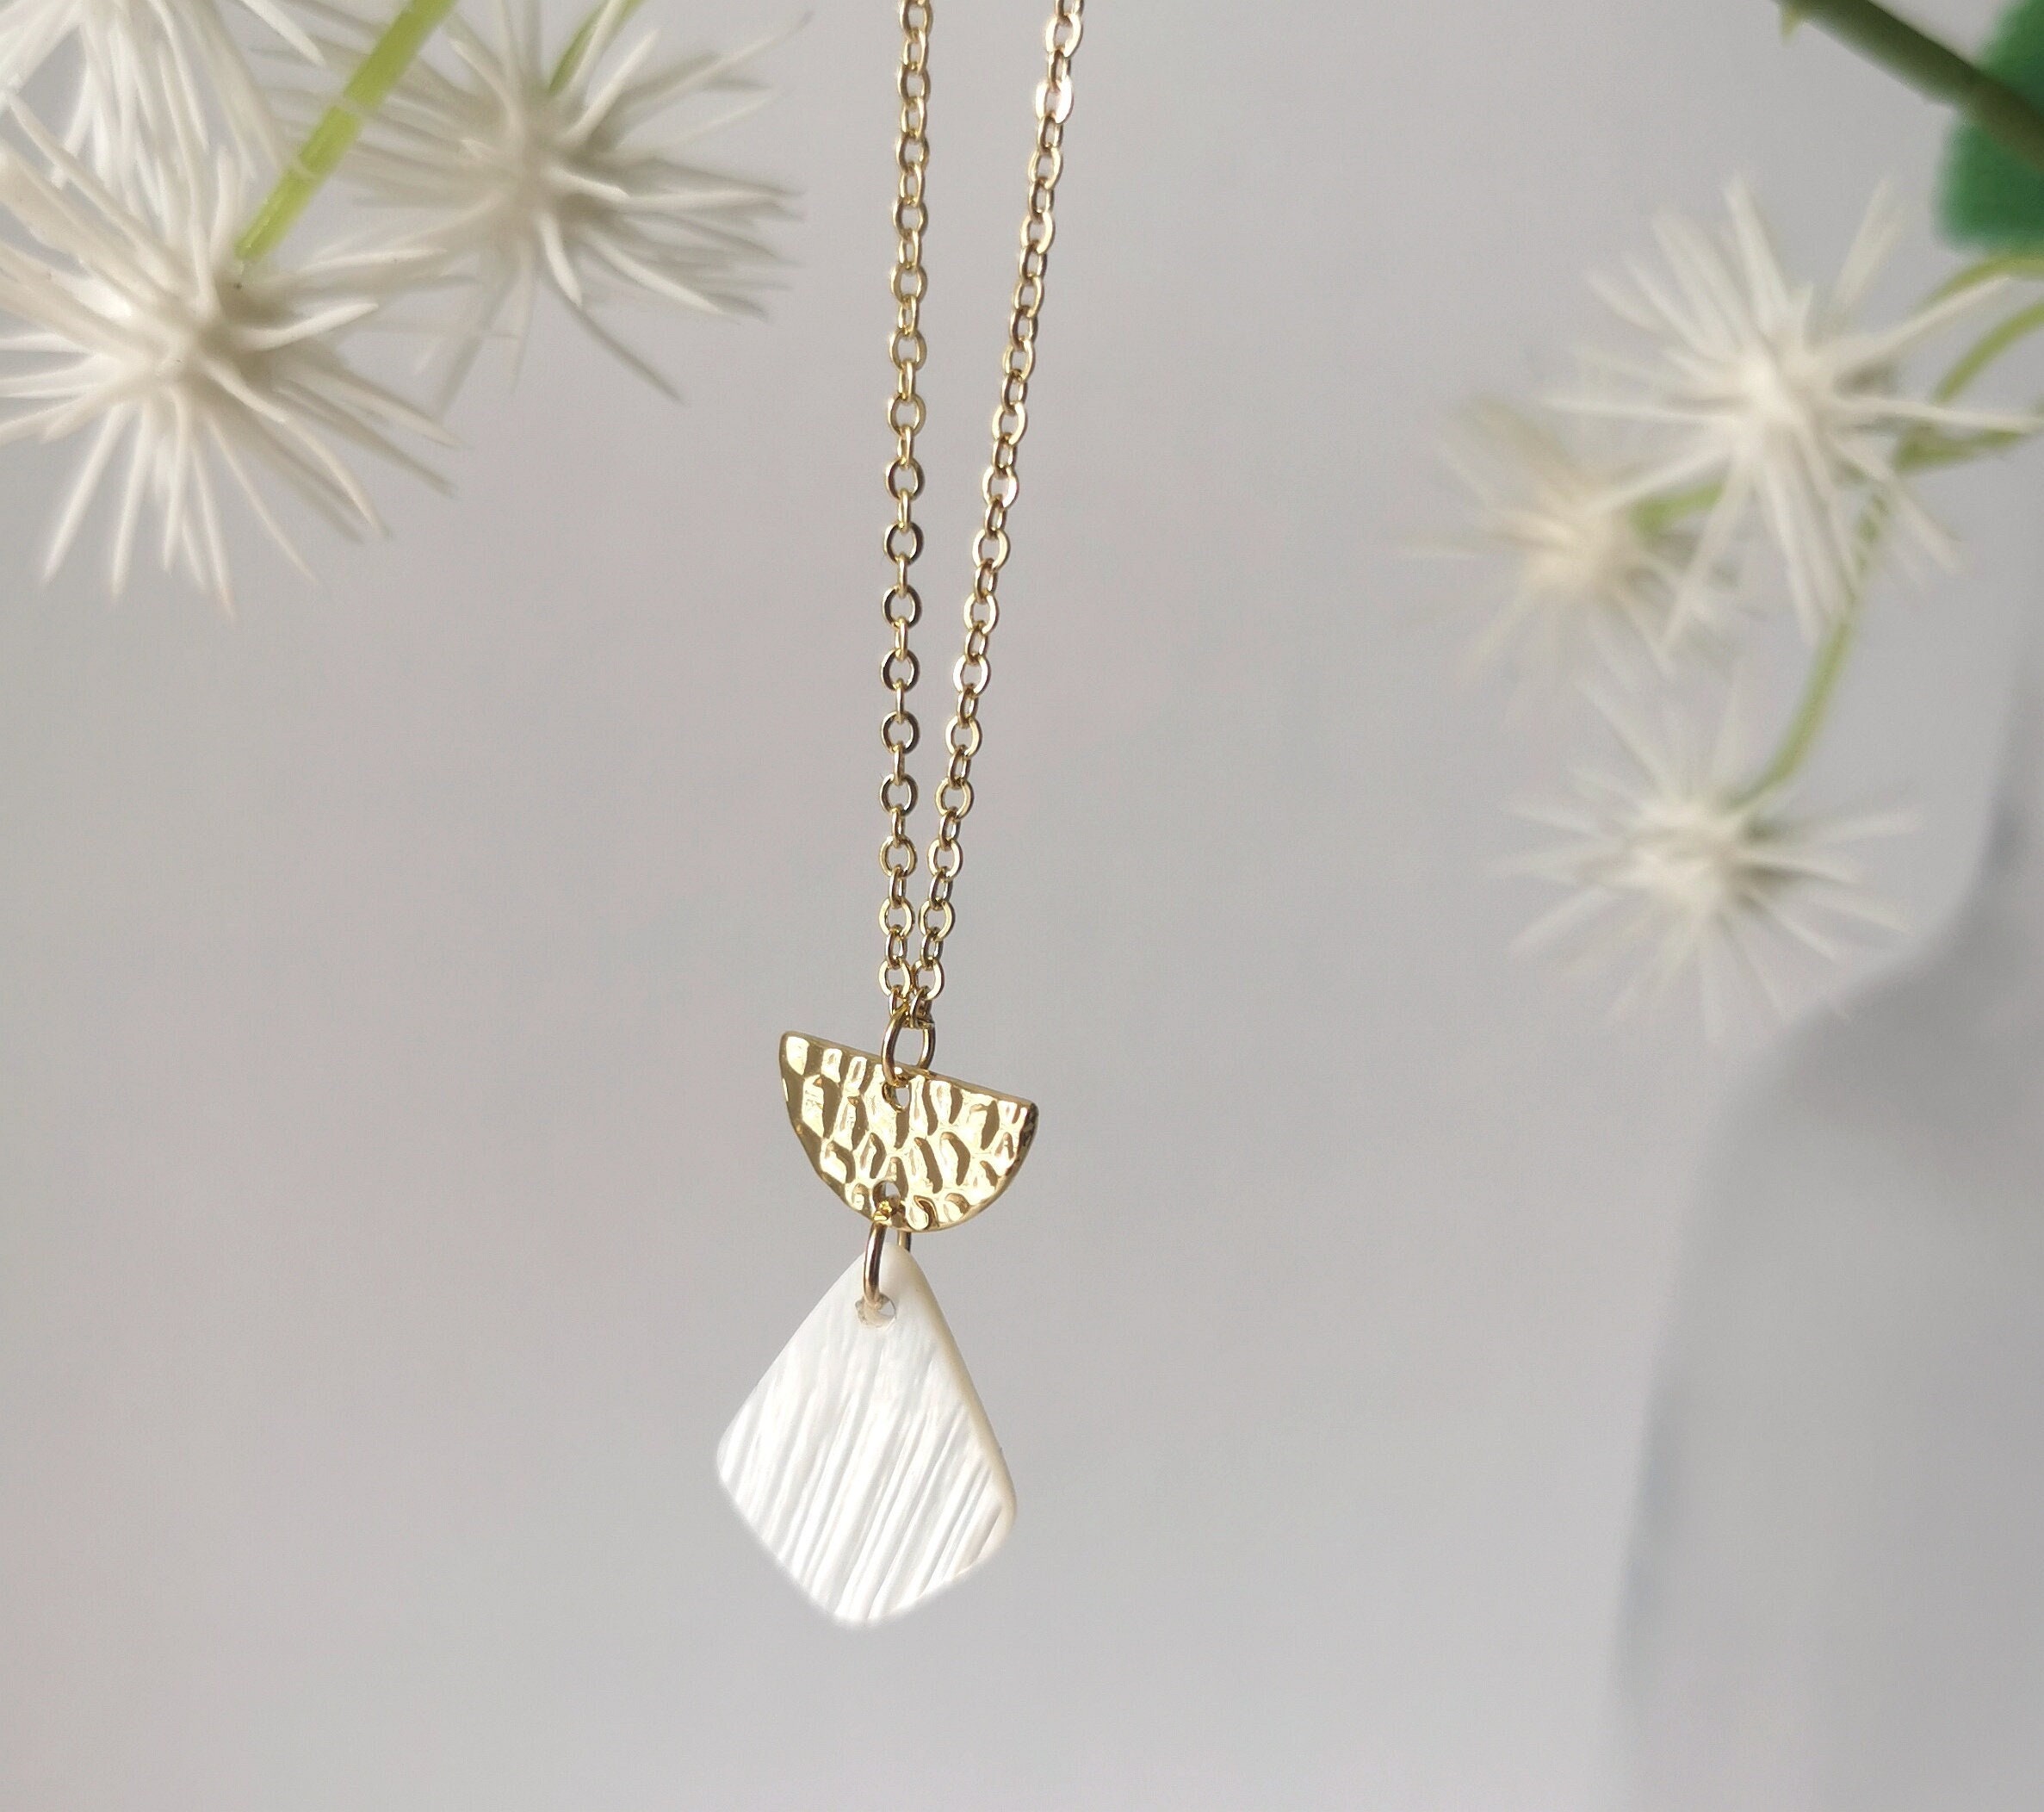 Delicate Art Deco Inspired Necklace With Half Moon Textured Brass & White Natural Shell Kite Charm On A Gold Plated Fine Chain